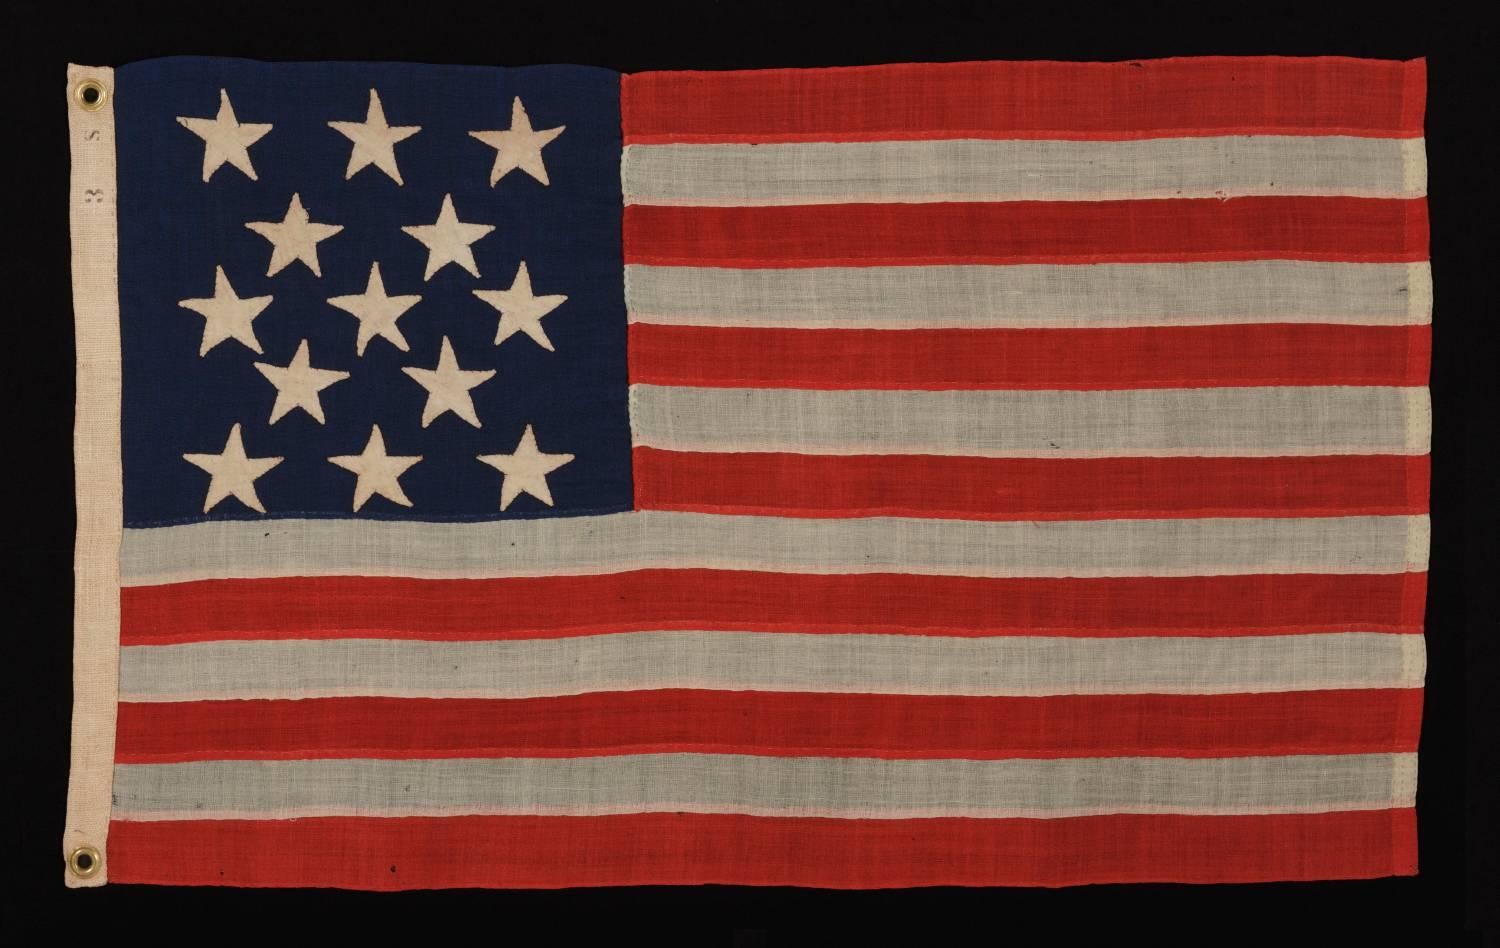 13 hand-sewn, single-appliquéd stars, likely made by Annin & Co. In New York city, in a rare, small size among known flags with sewn construction, 1861-1876 era, probably designed for use as a camp colors or in some other military function: